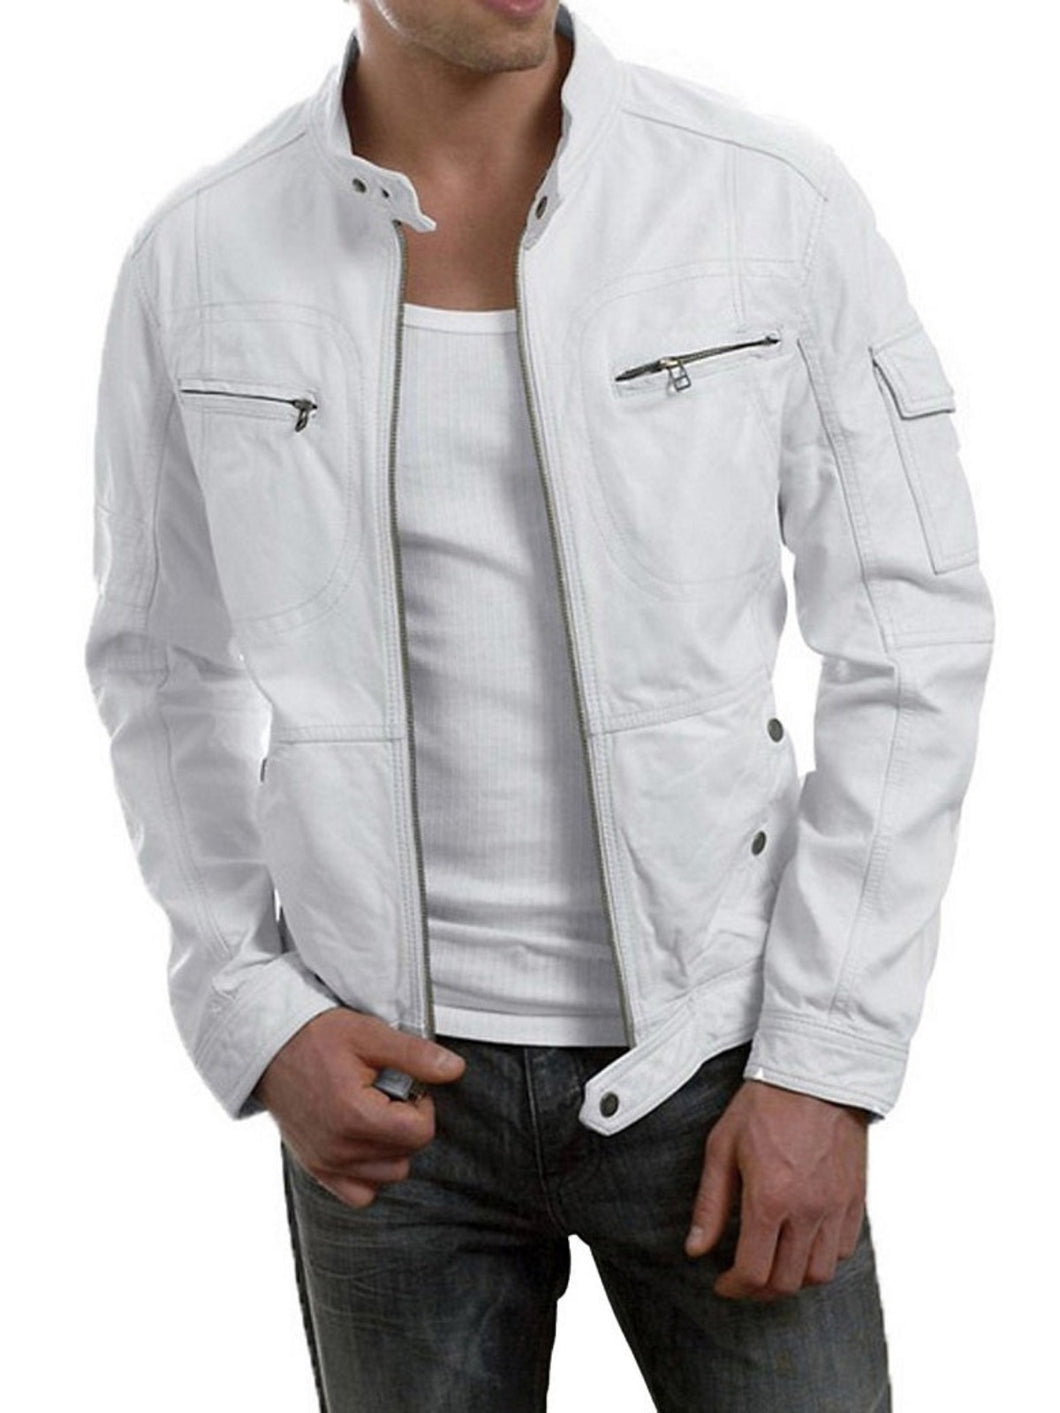 Men’s Vintage White Real Leather Jackets